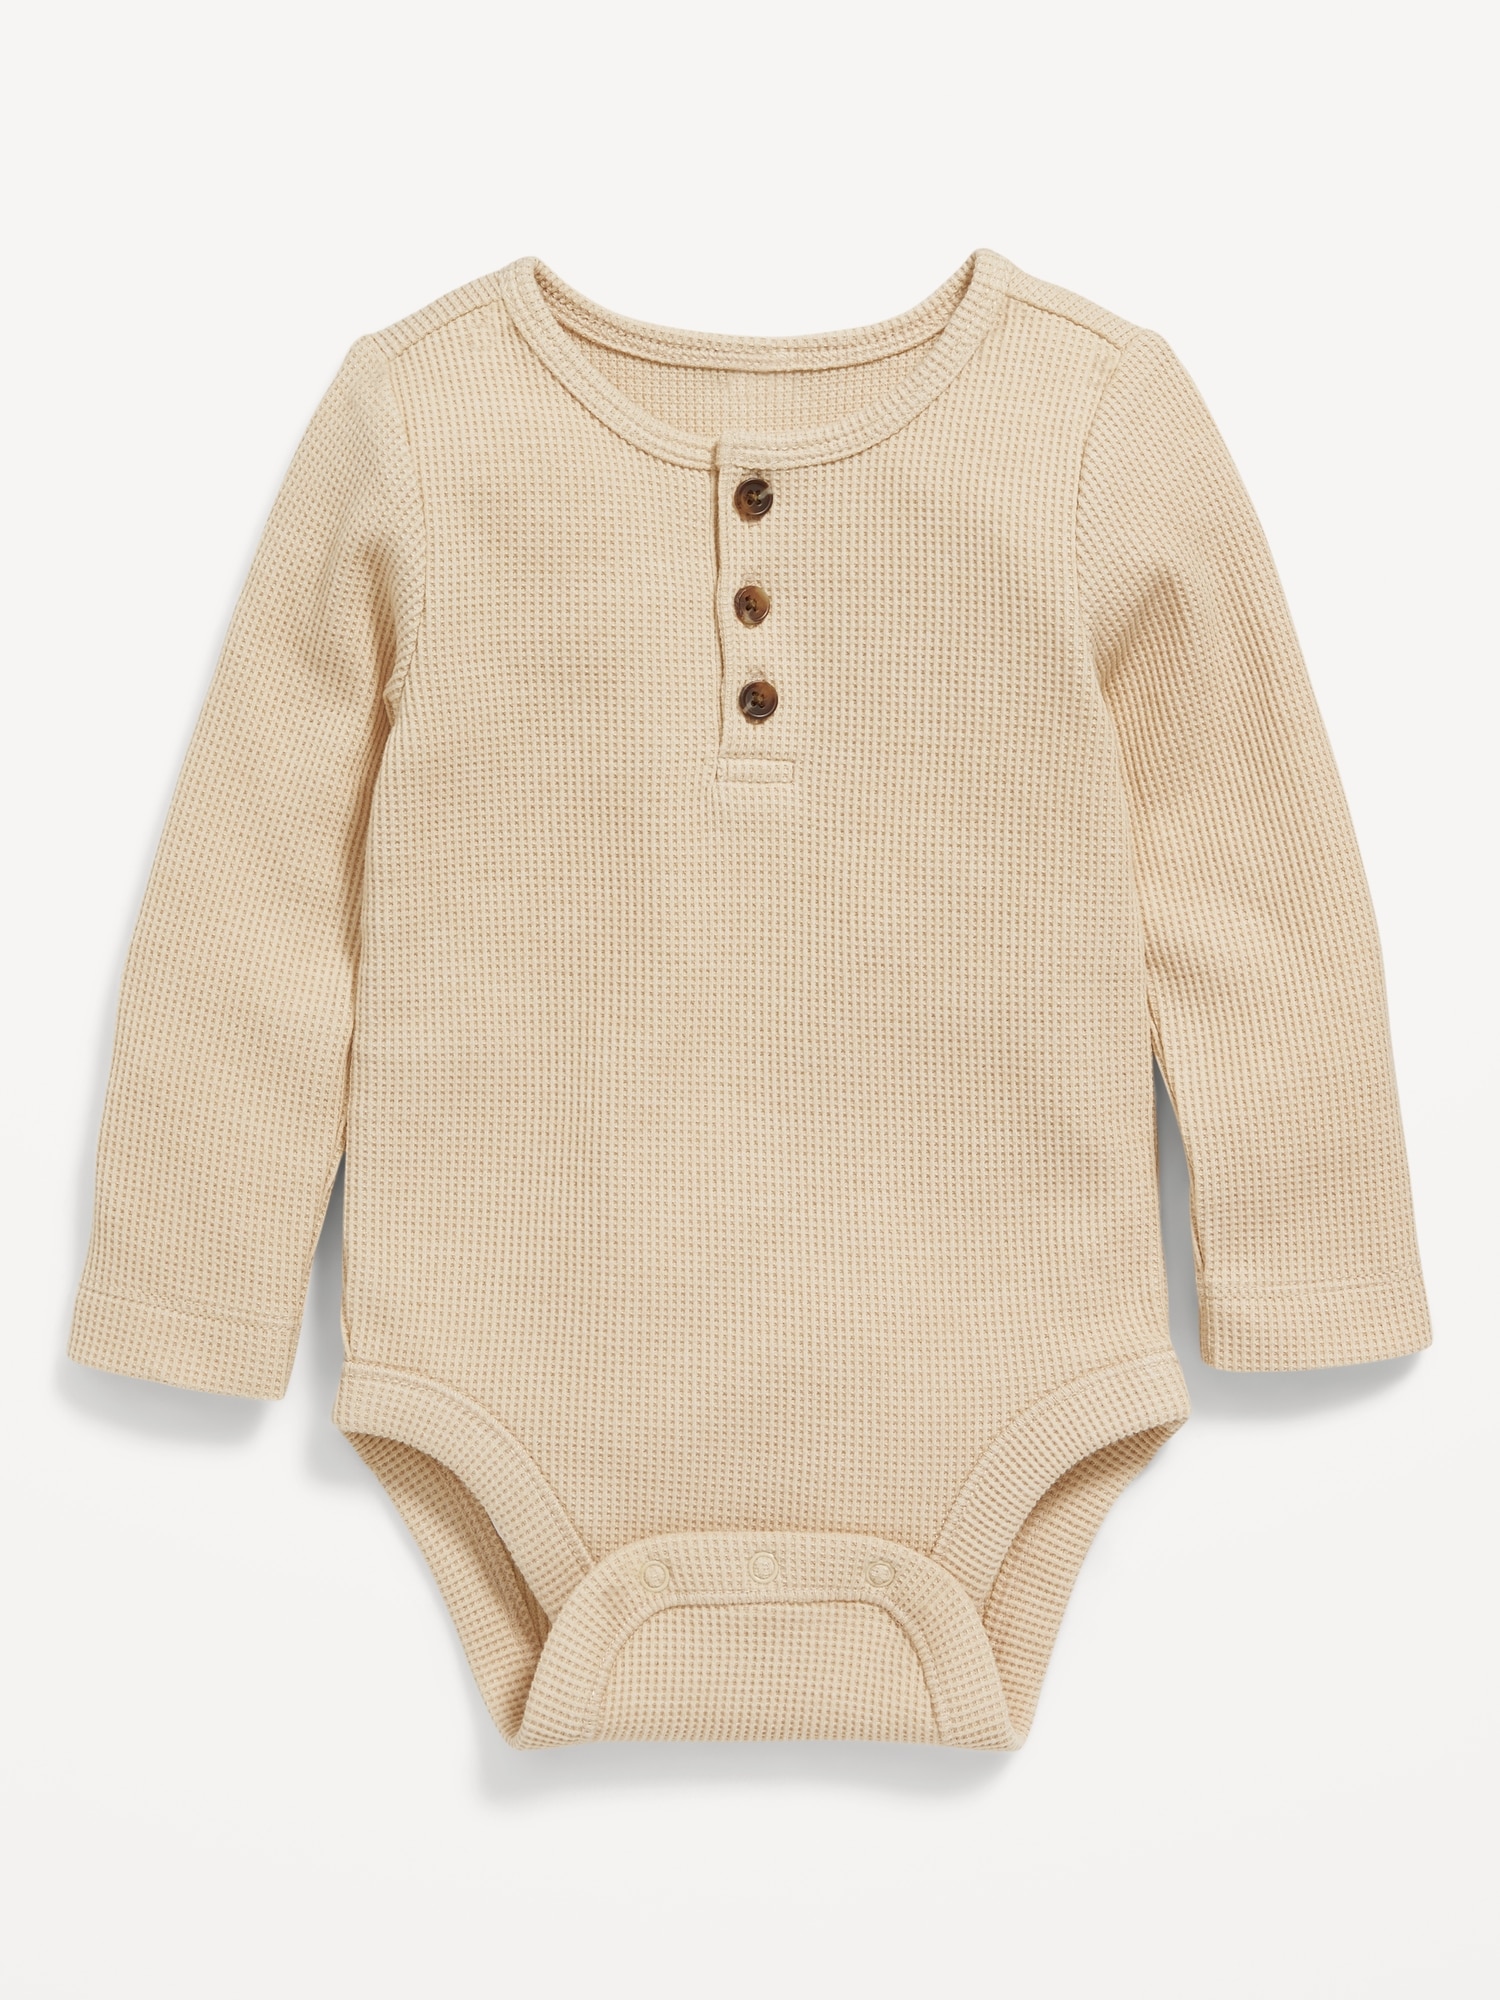 Unisex Printed Thermal Henley Bodysuit for Baby